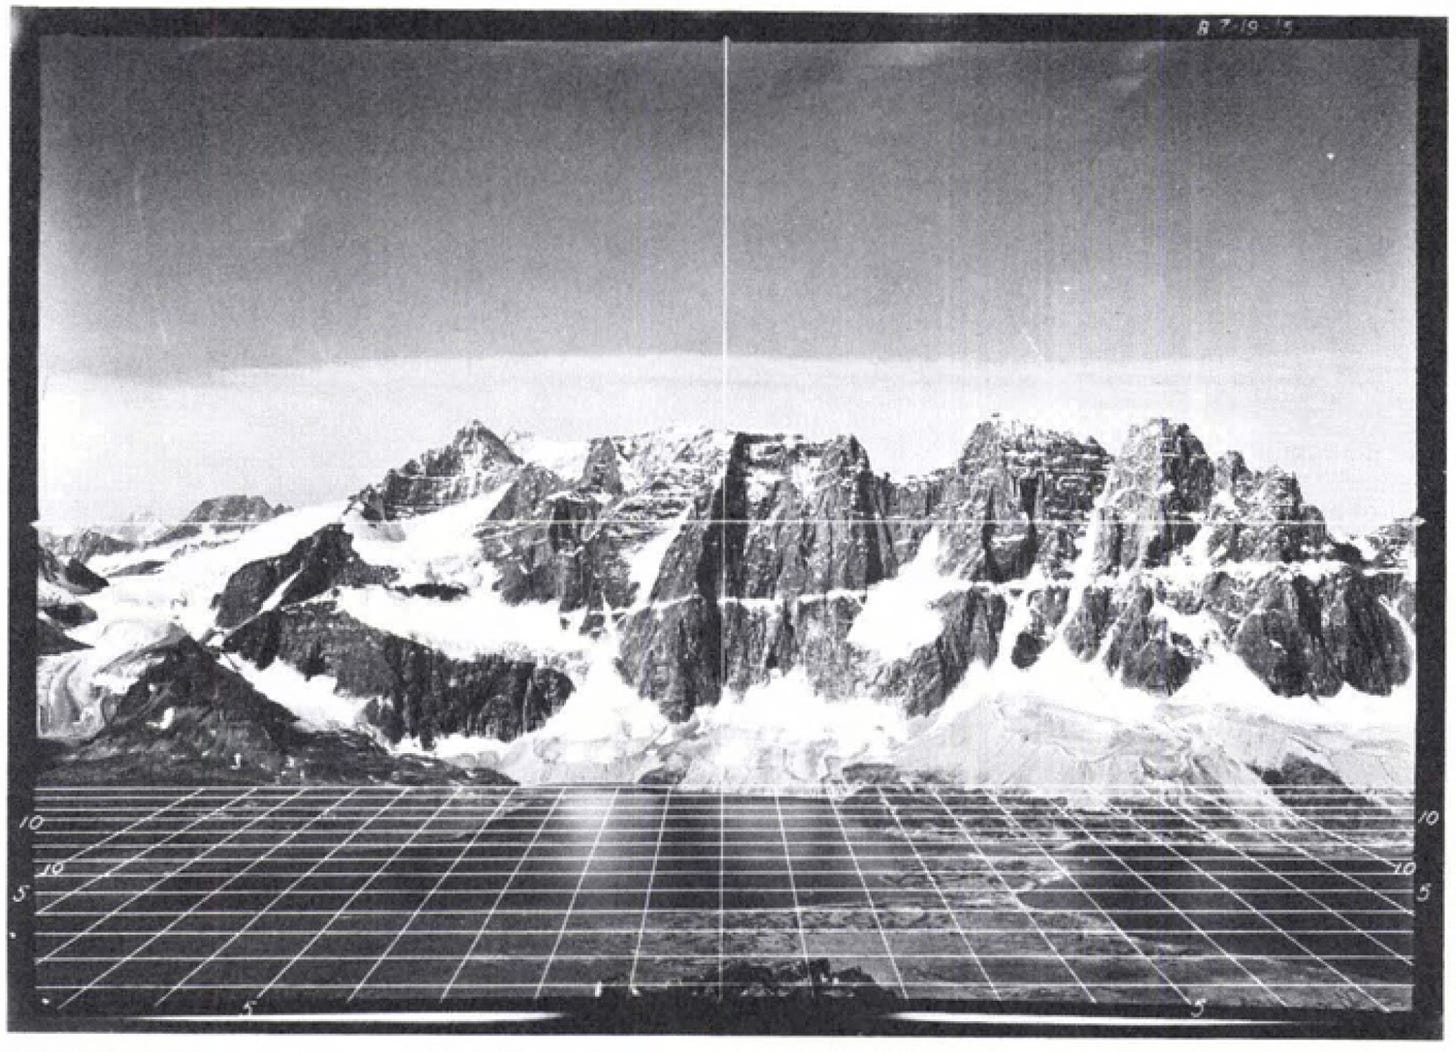 An image taken with a Perspectometer, “a perspective grid used as a guide in sketching horizontal features on the map.” 1924, Public Domain. Found    here   .